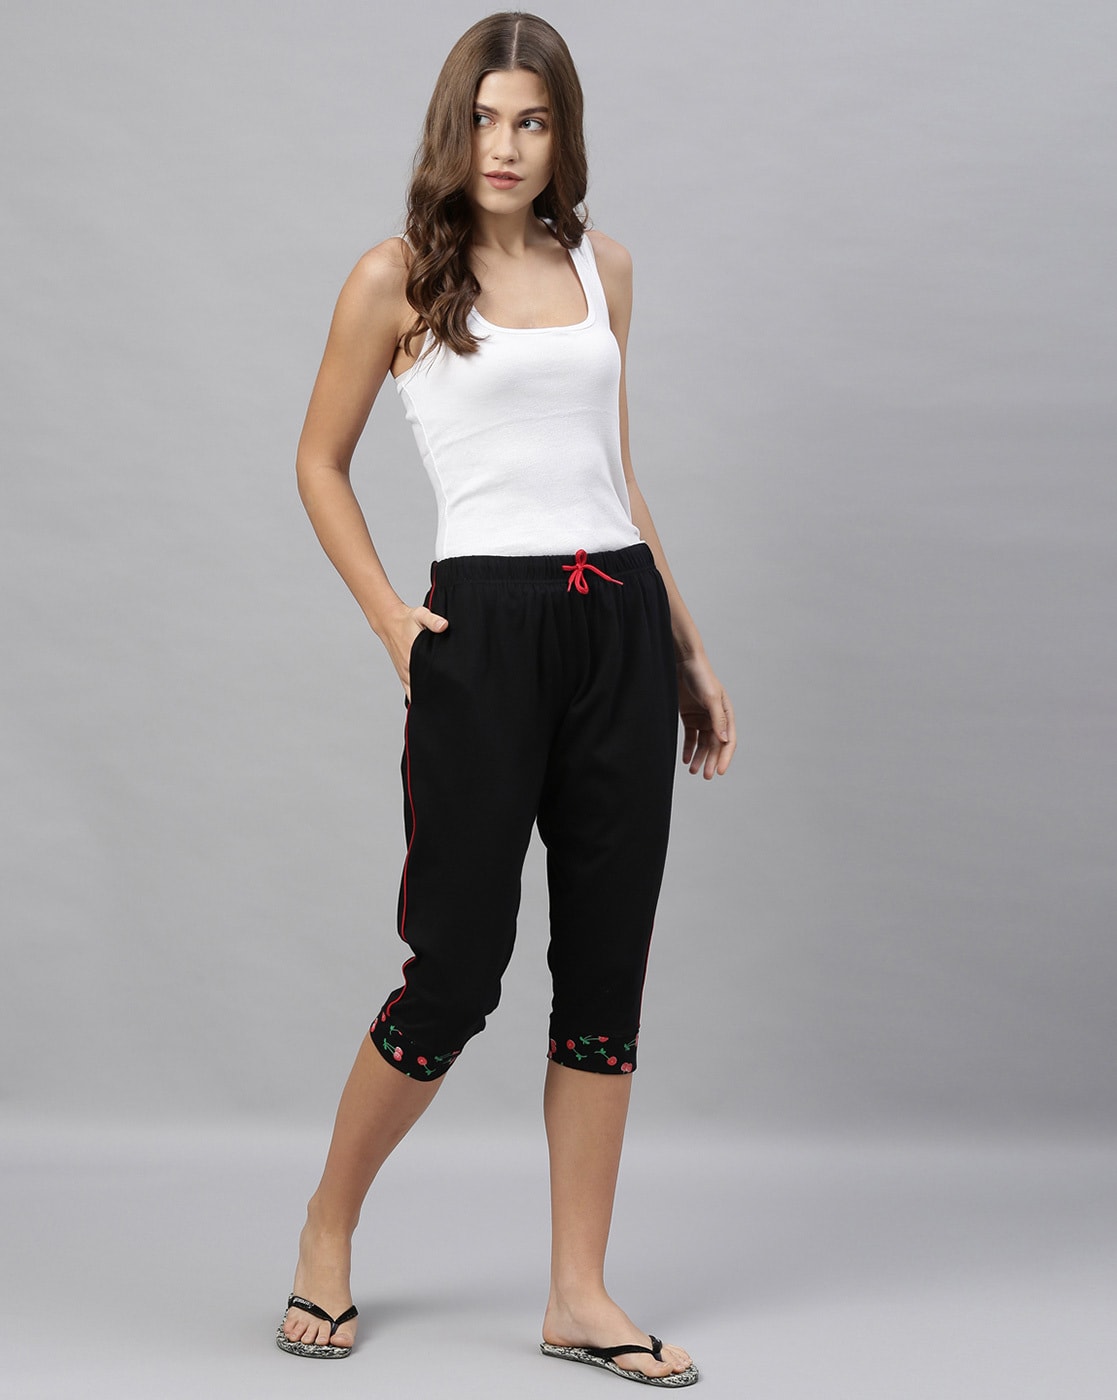 Buy Black Trousers & Pants for Women by Kryptic Online